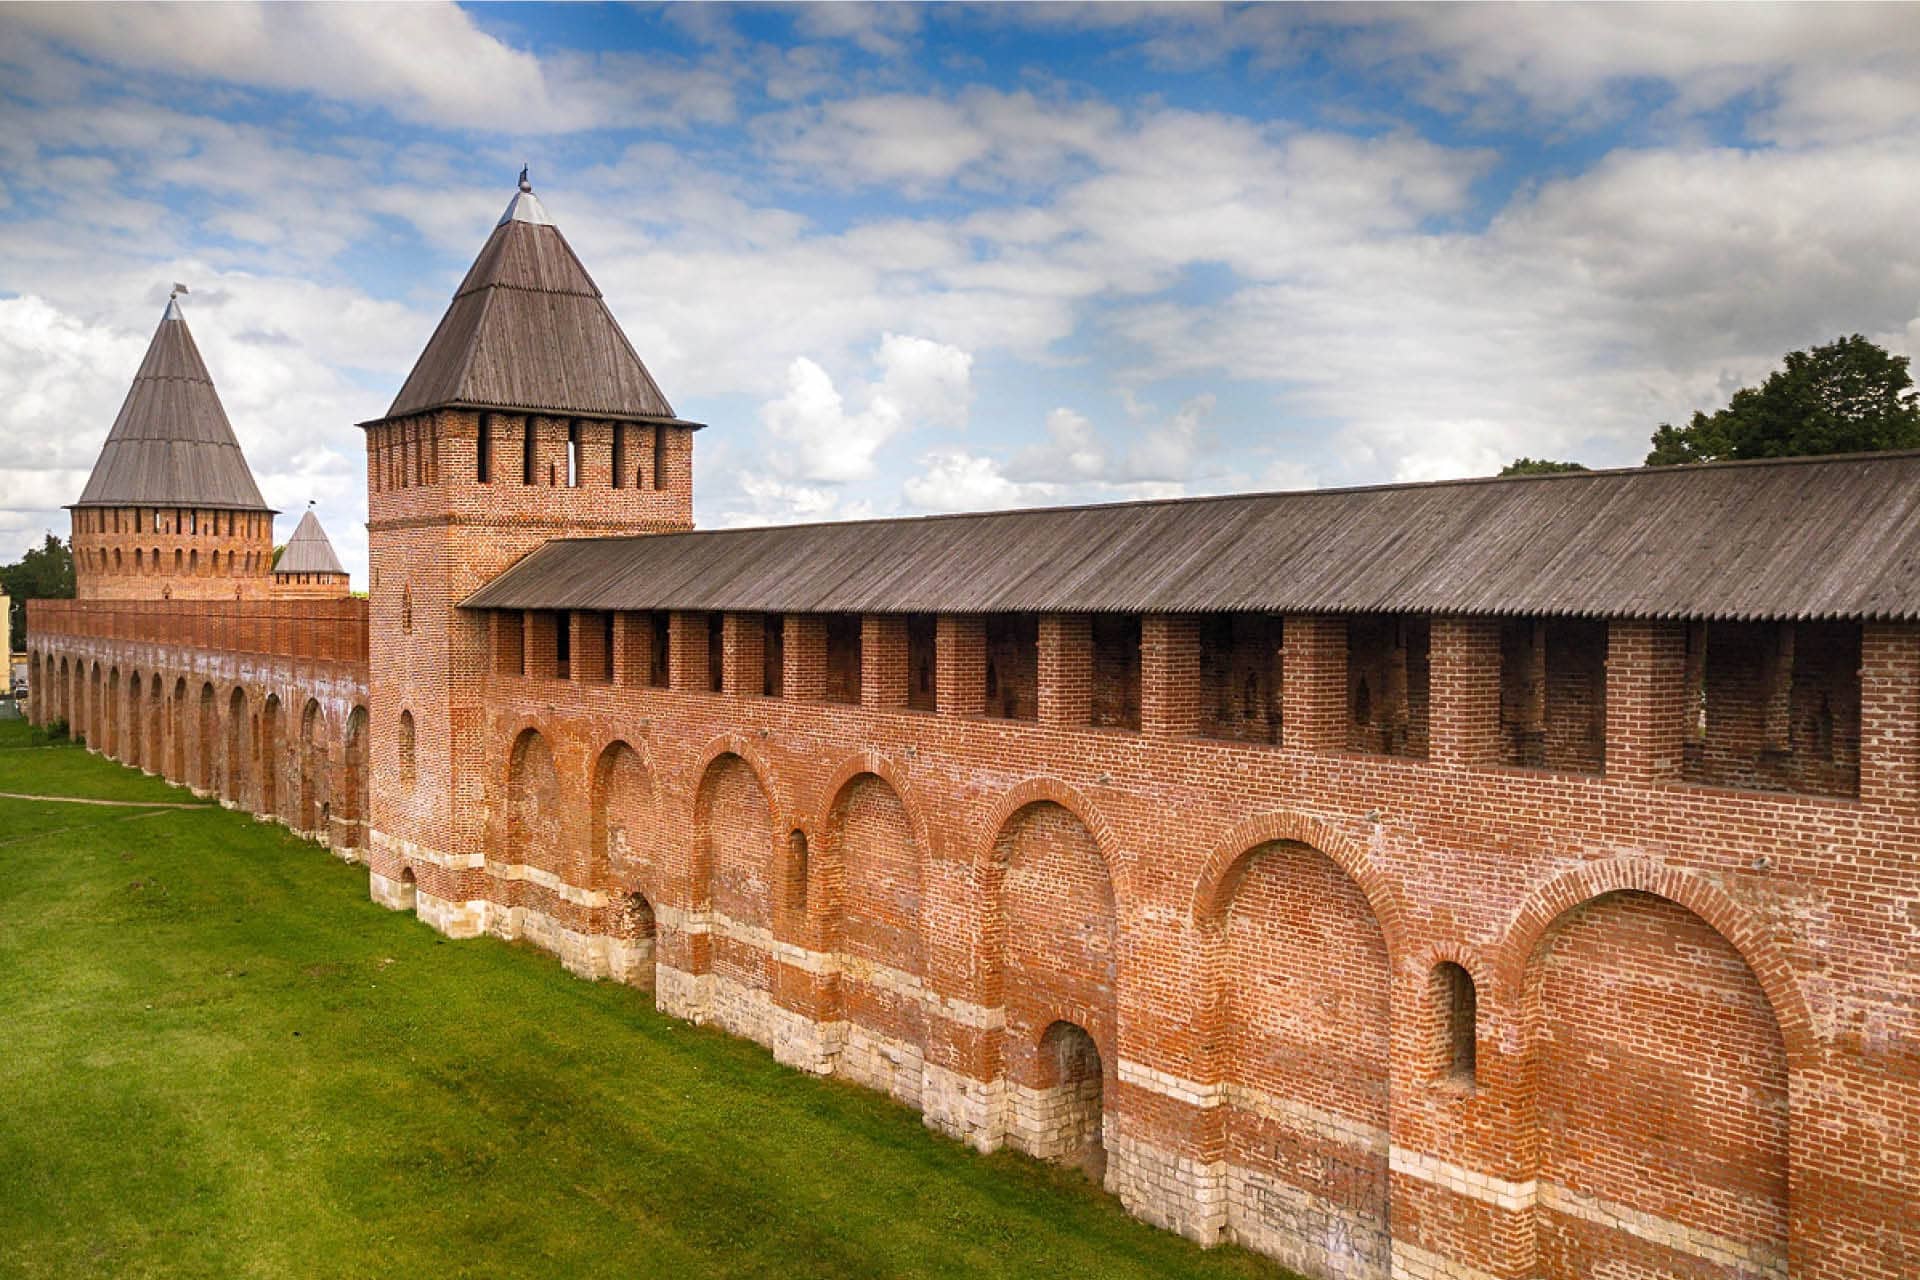 A red brick wall of the Russian Kremlin with a quadrate tower